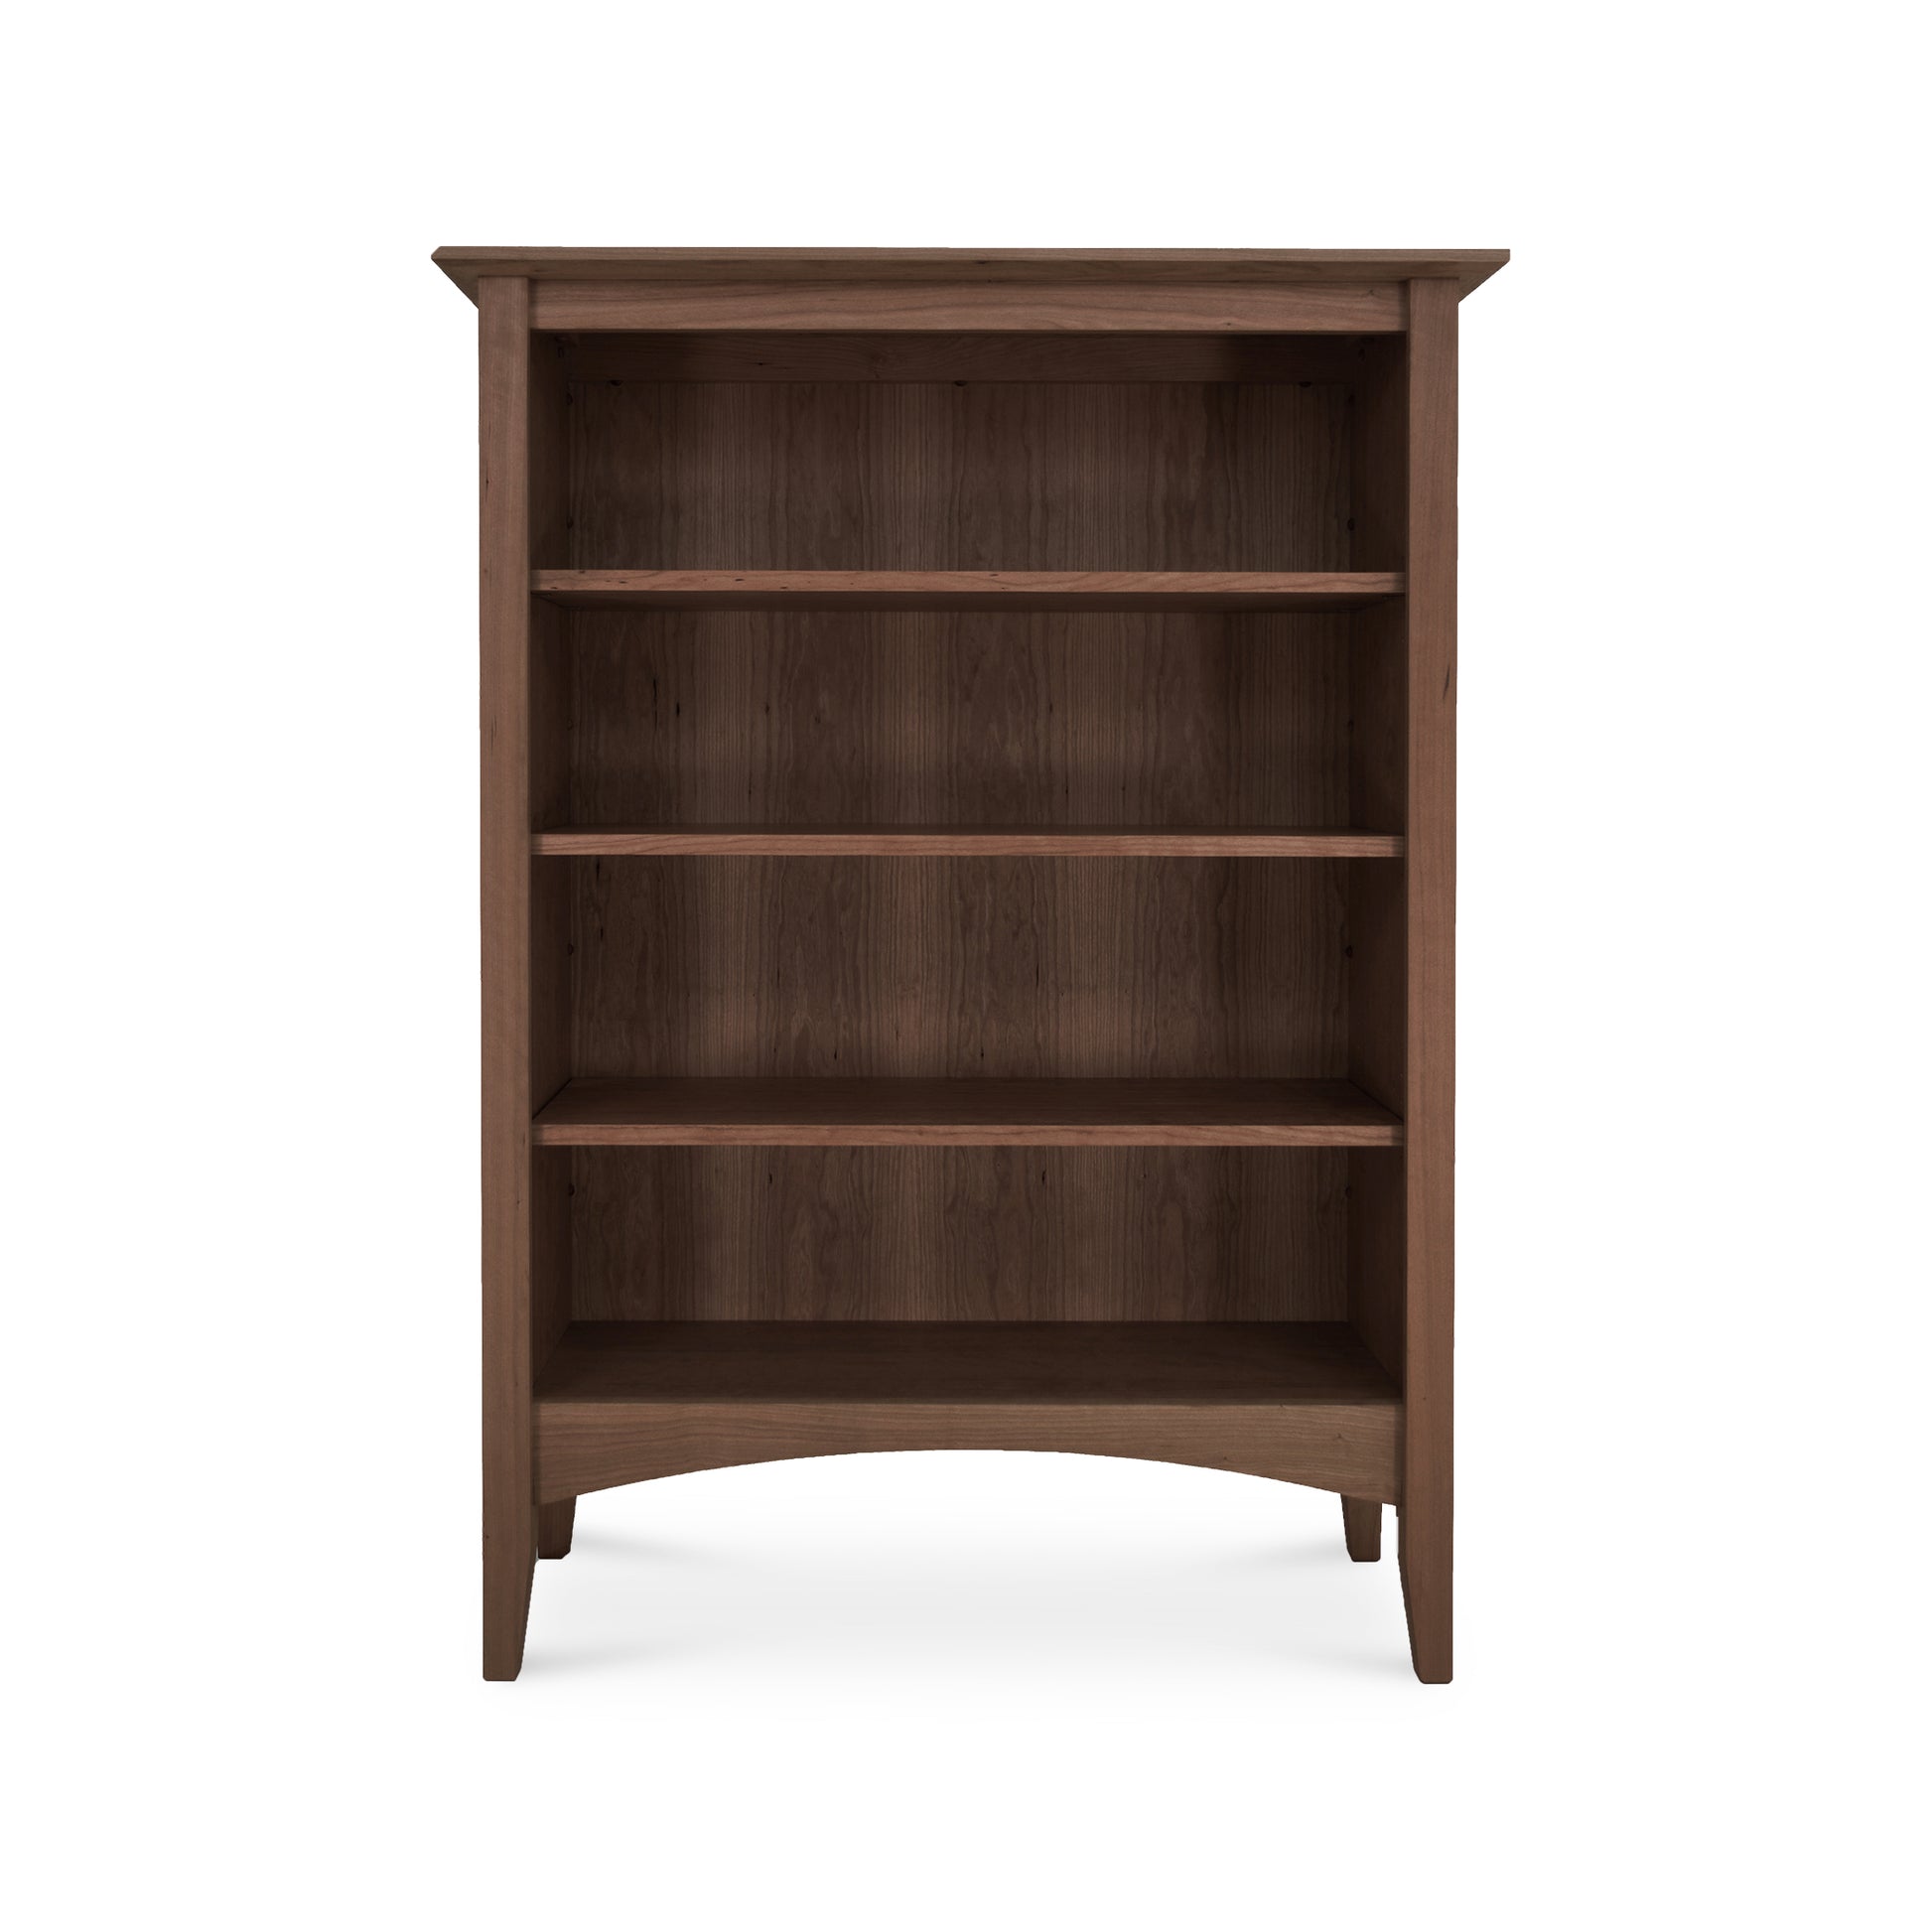 A brown Maple Corner Woodworks American Shaker bookcase on a white background.